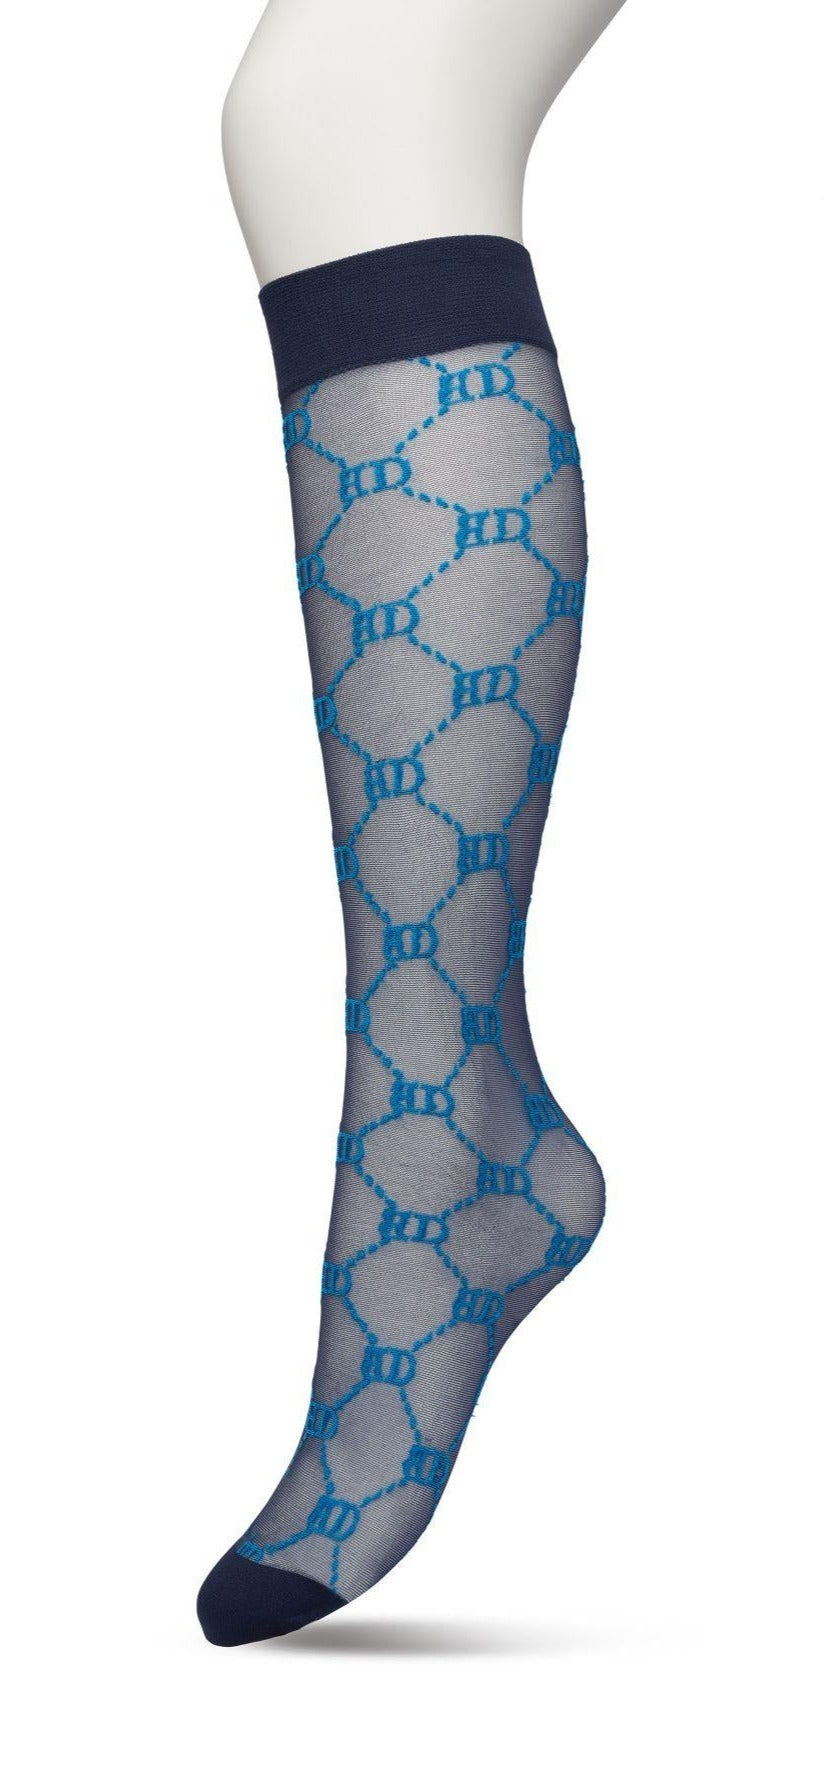 Bonnie Doon BP221801 Logo Knee-highs - Sheer navy and blue Gucci inspired fashion knee high socks with a woven dotted diamond style pattern with BD for Bonnie Doon